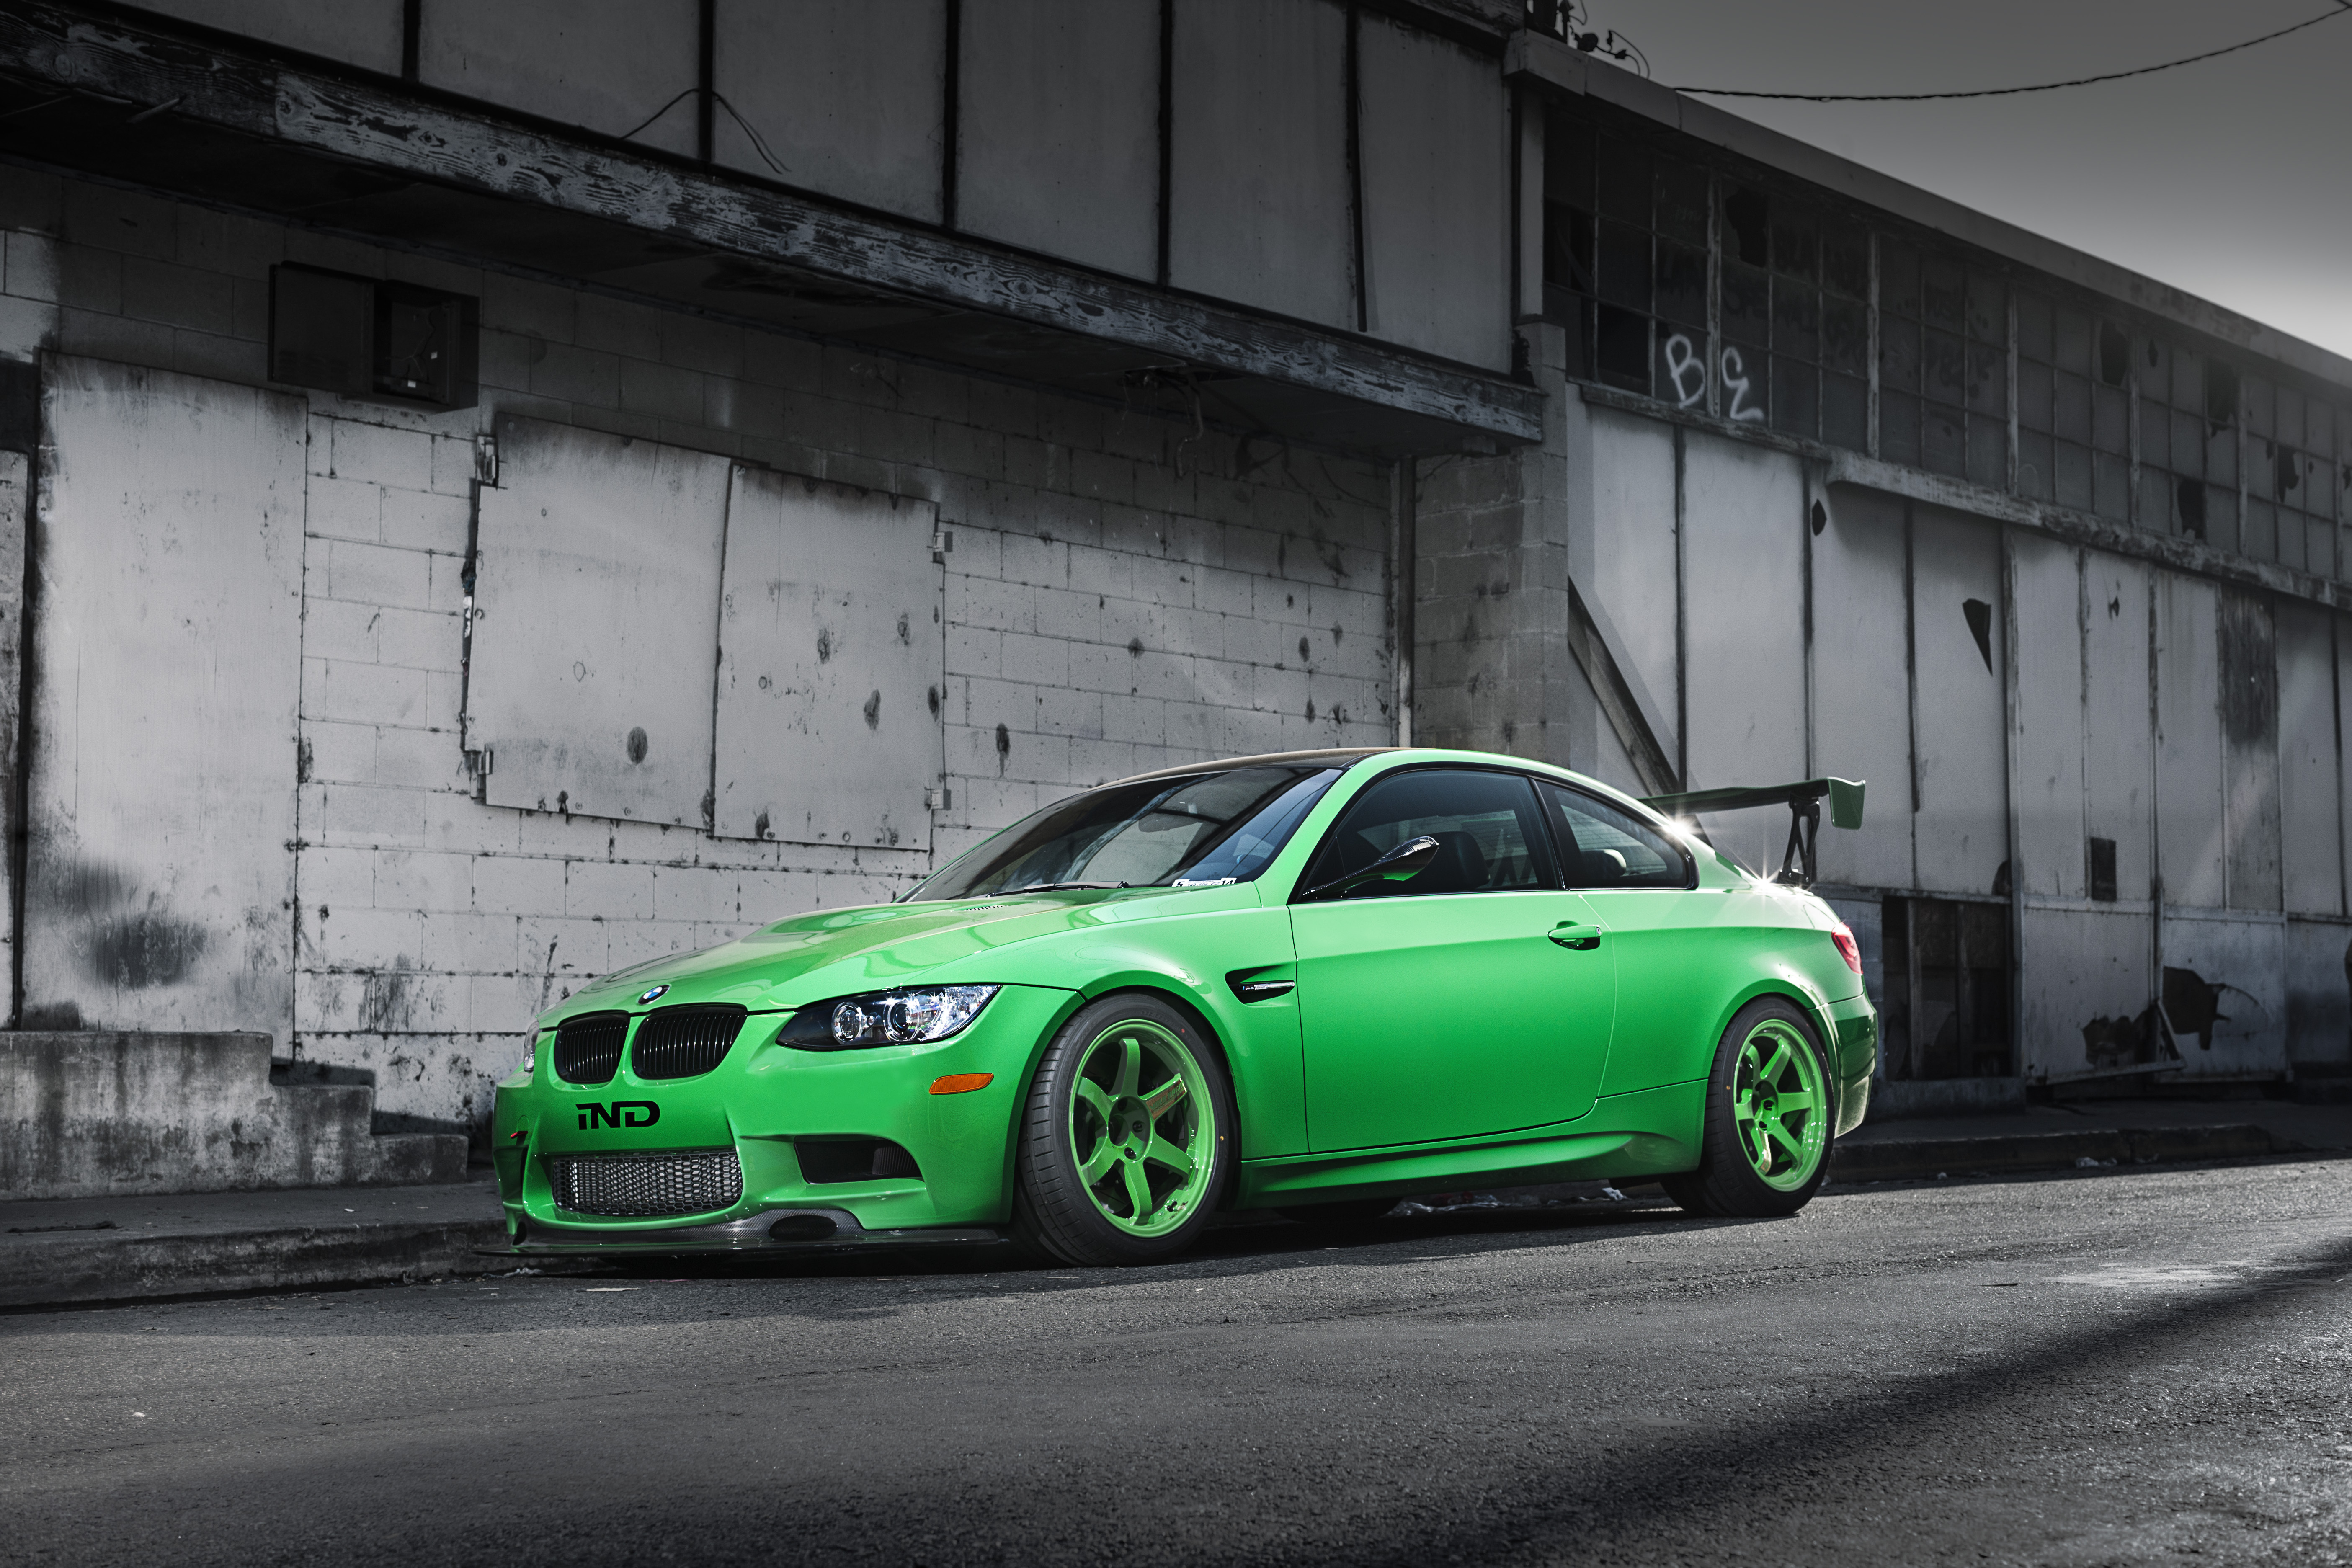 shadow, e92, bmw, cars, green, building, side view, wing, m3